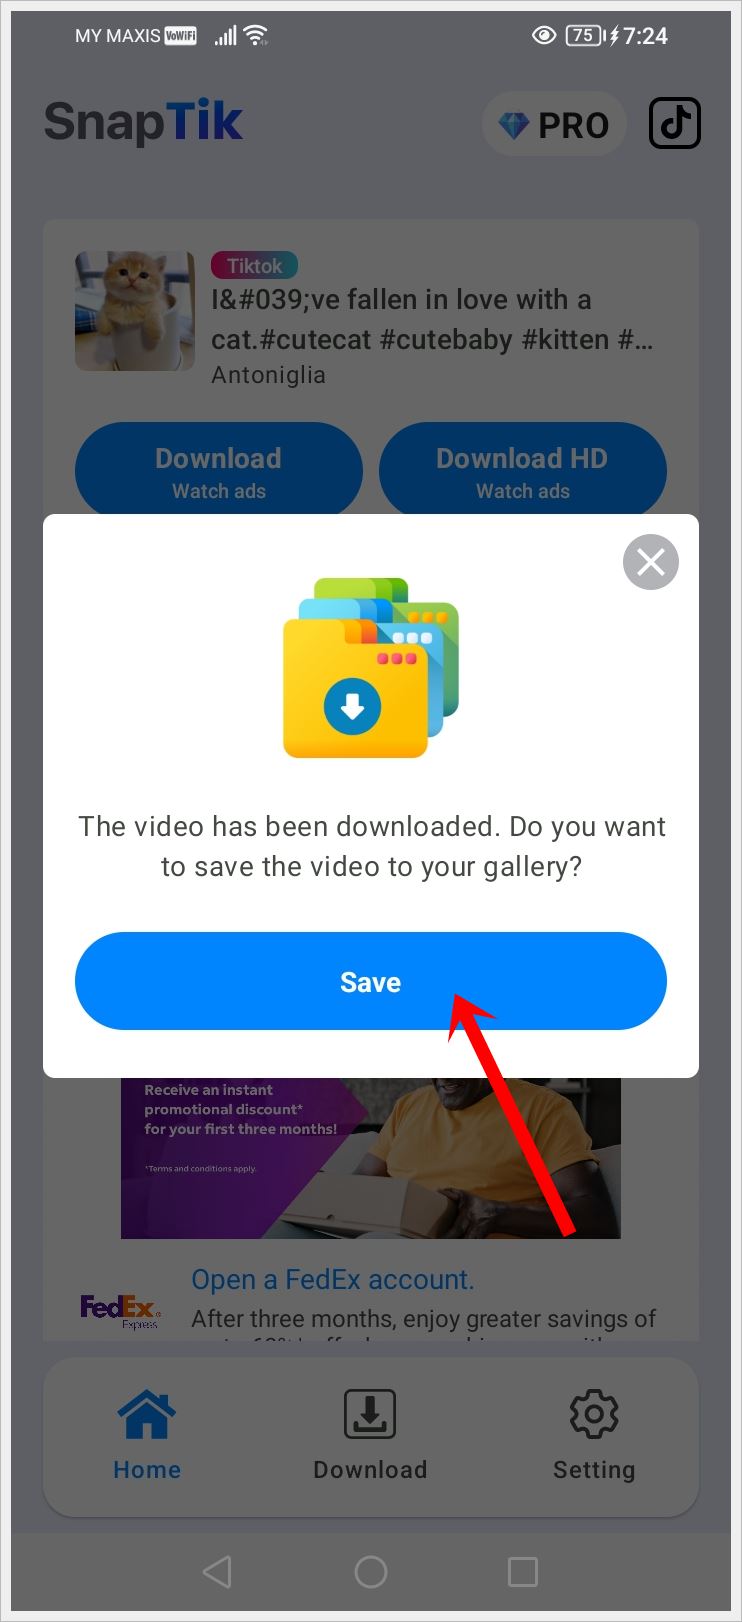 How to Download or Save TikTok Videos Easily: This image shows a SnapTik pop up notification asking if you would like to save the downloaded TikTok video to your device's gallery. The 'Save' button is highlighted.